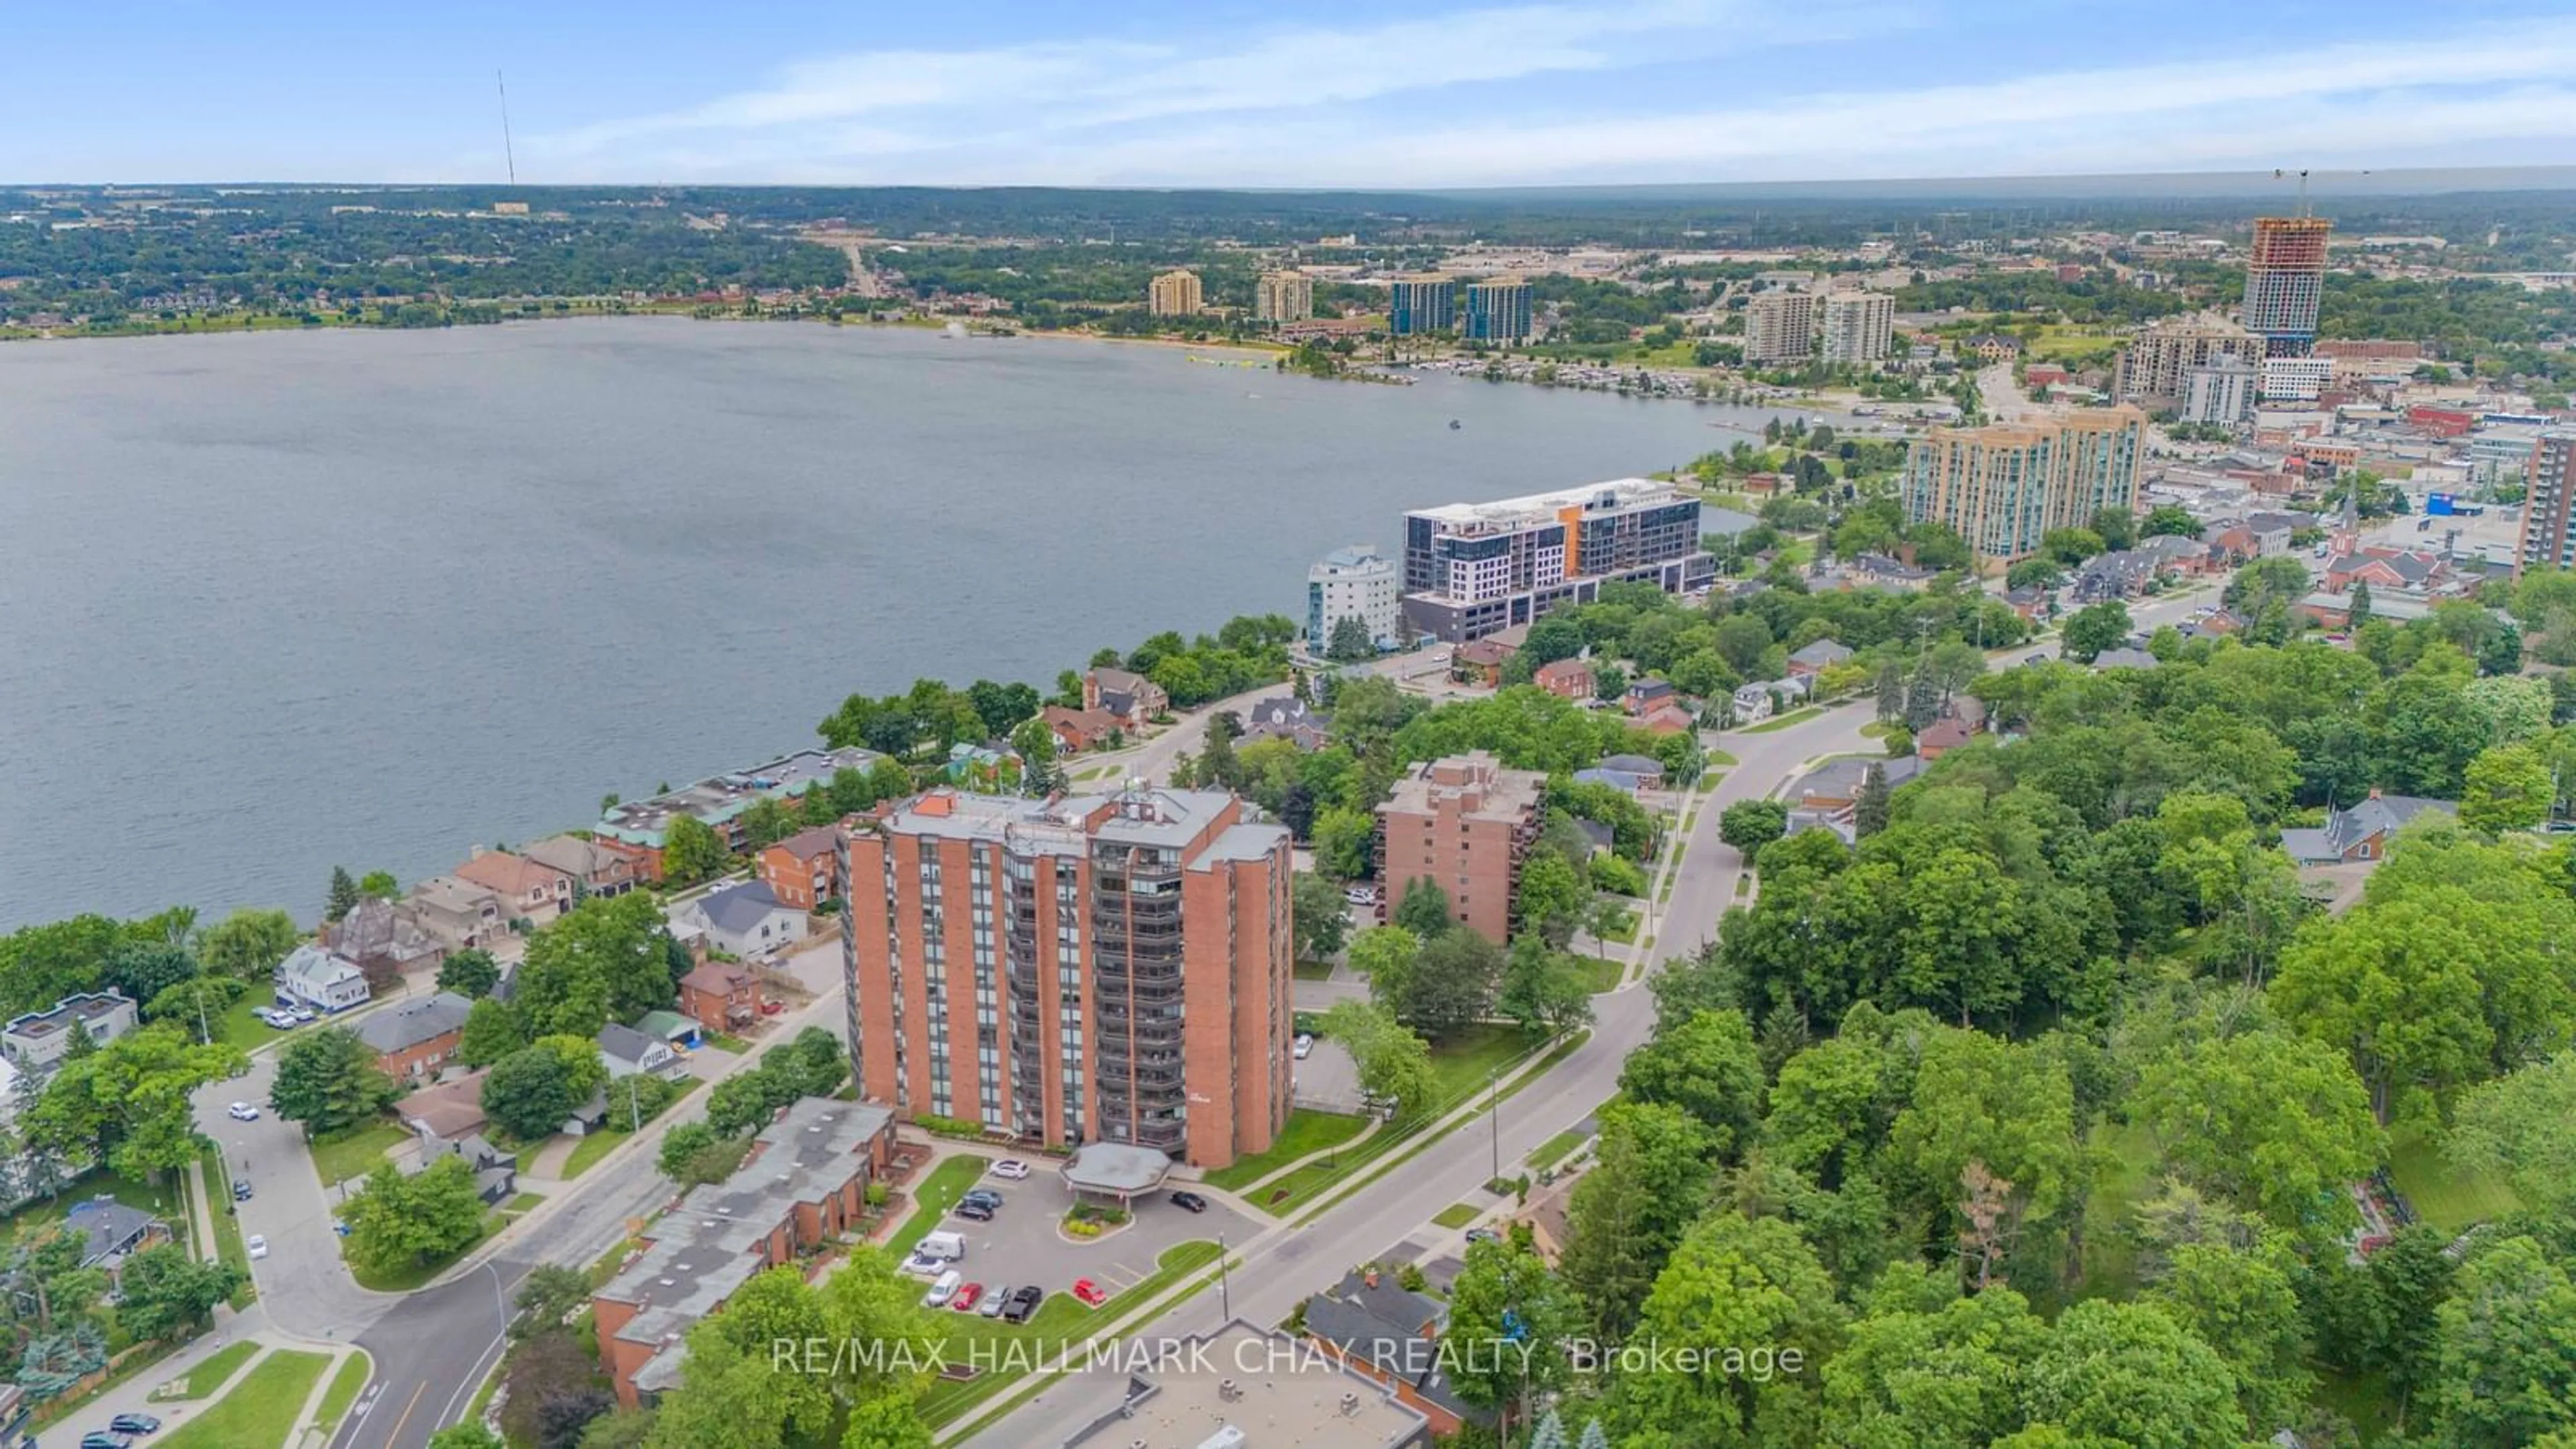 Lakeview for 181 Collier St #505, Barrie Ontario L4M 5L6